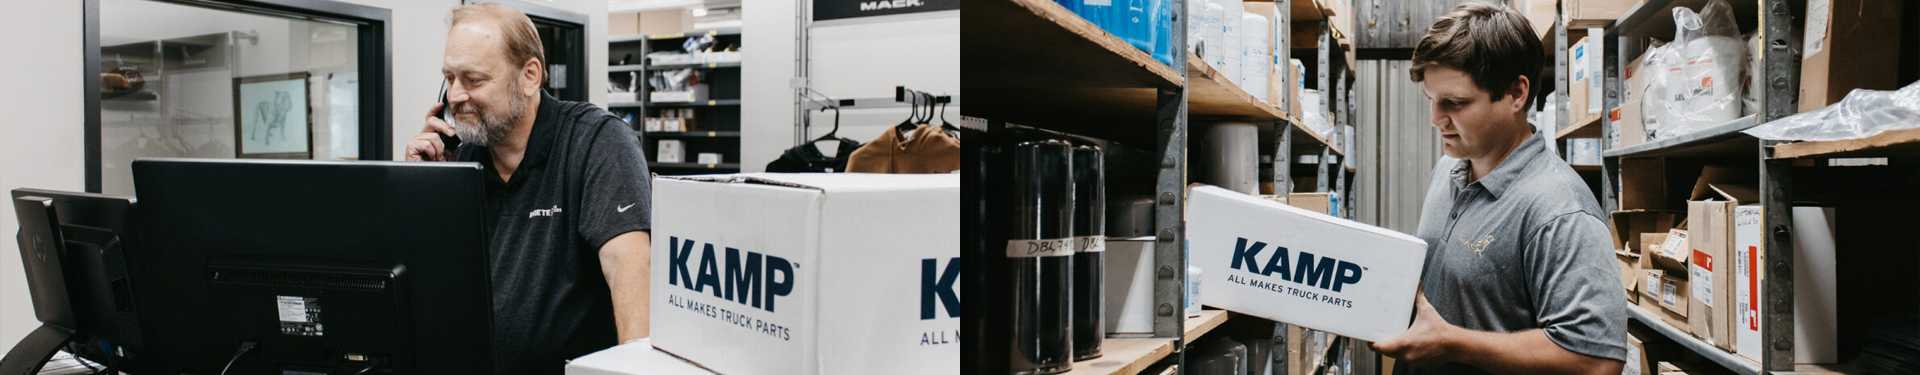 KAMP All Makes Truck Parts - Extensive Inventory. Fast Delivery.